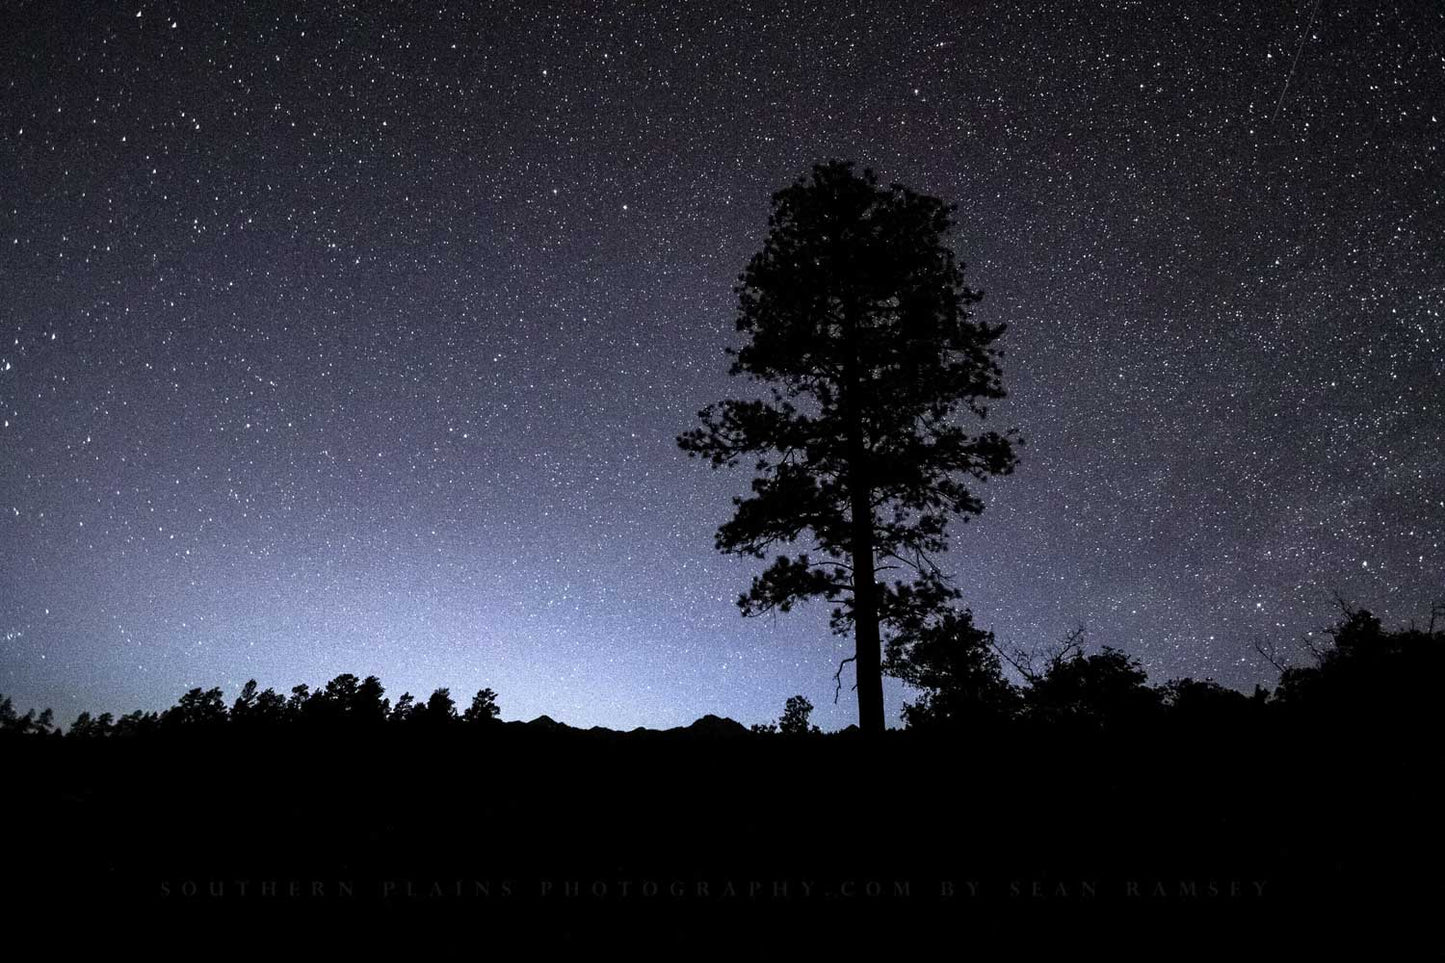 Celestial photography print of a pine tree silhouette against a starry night sky in the Rocky Mountains of Colorado by Sean Ramsey of Southern Plains Photography.